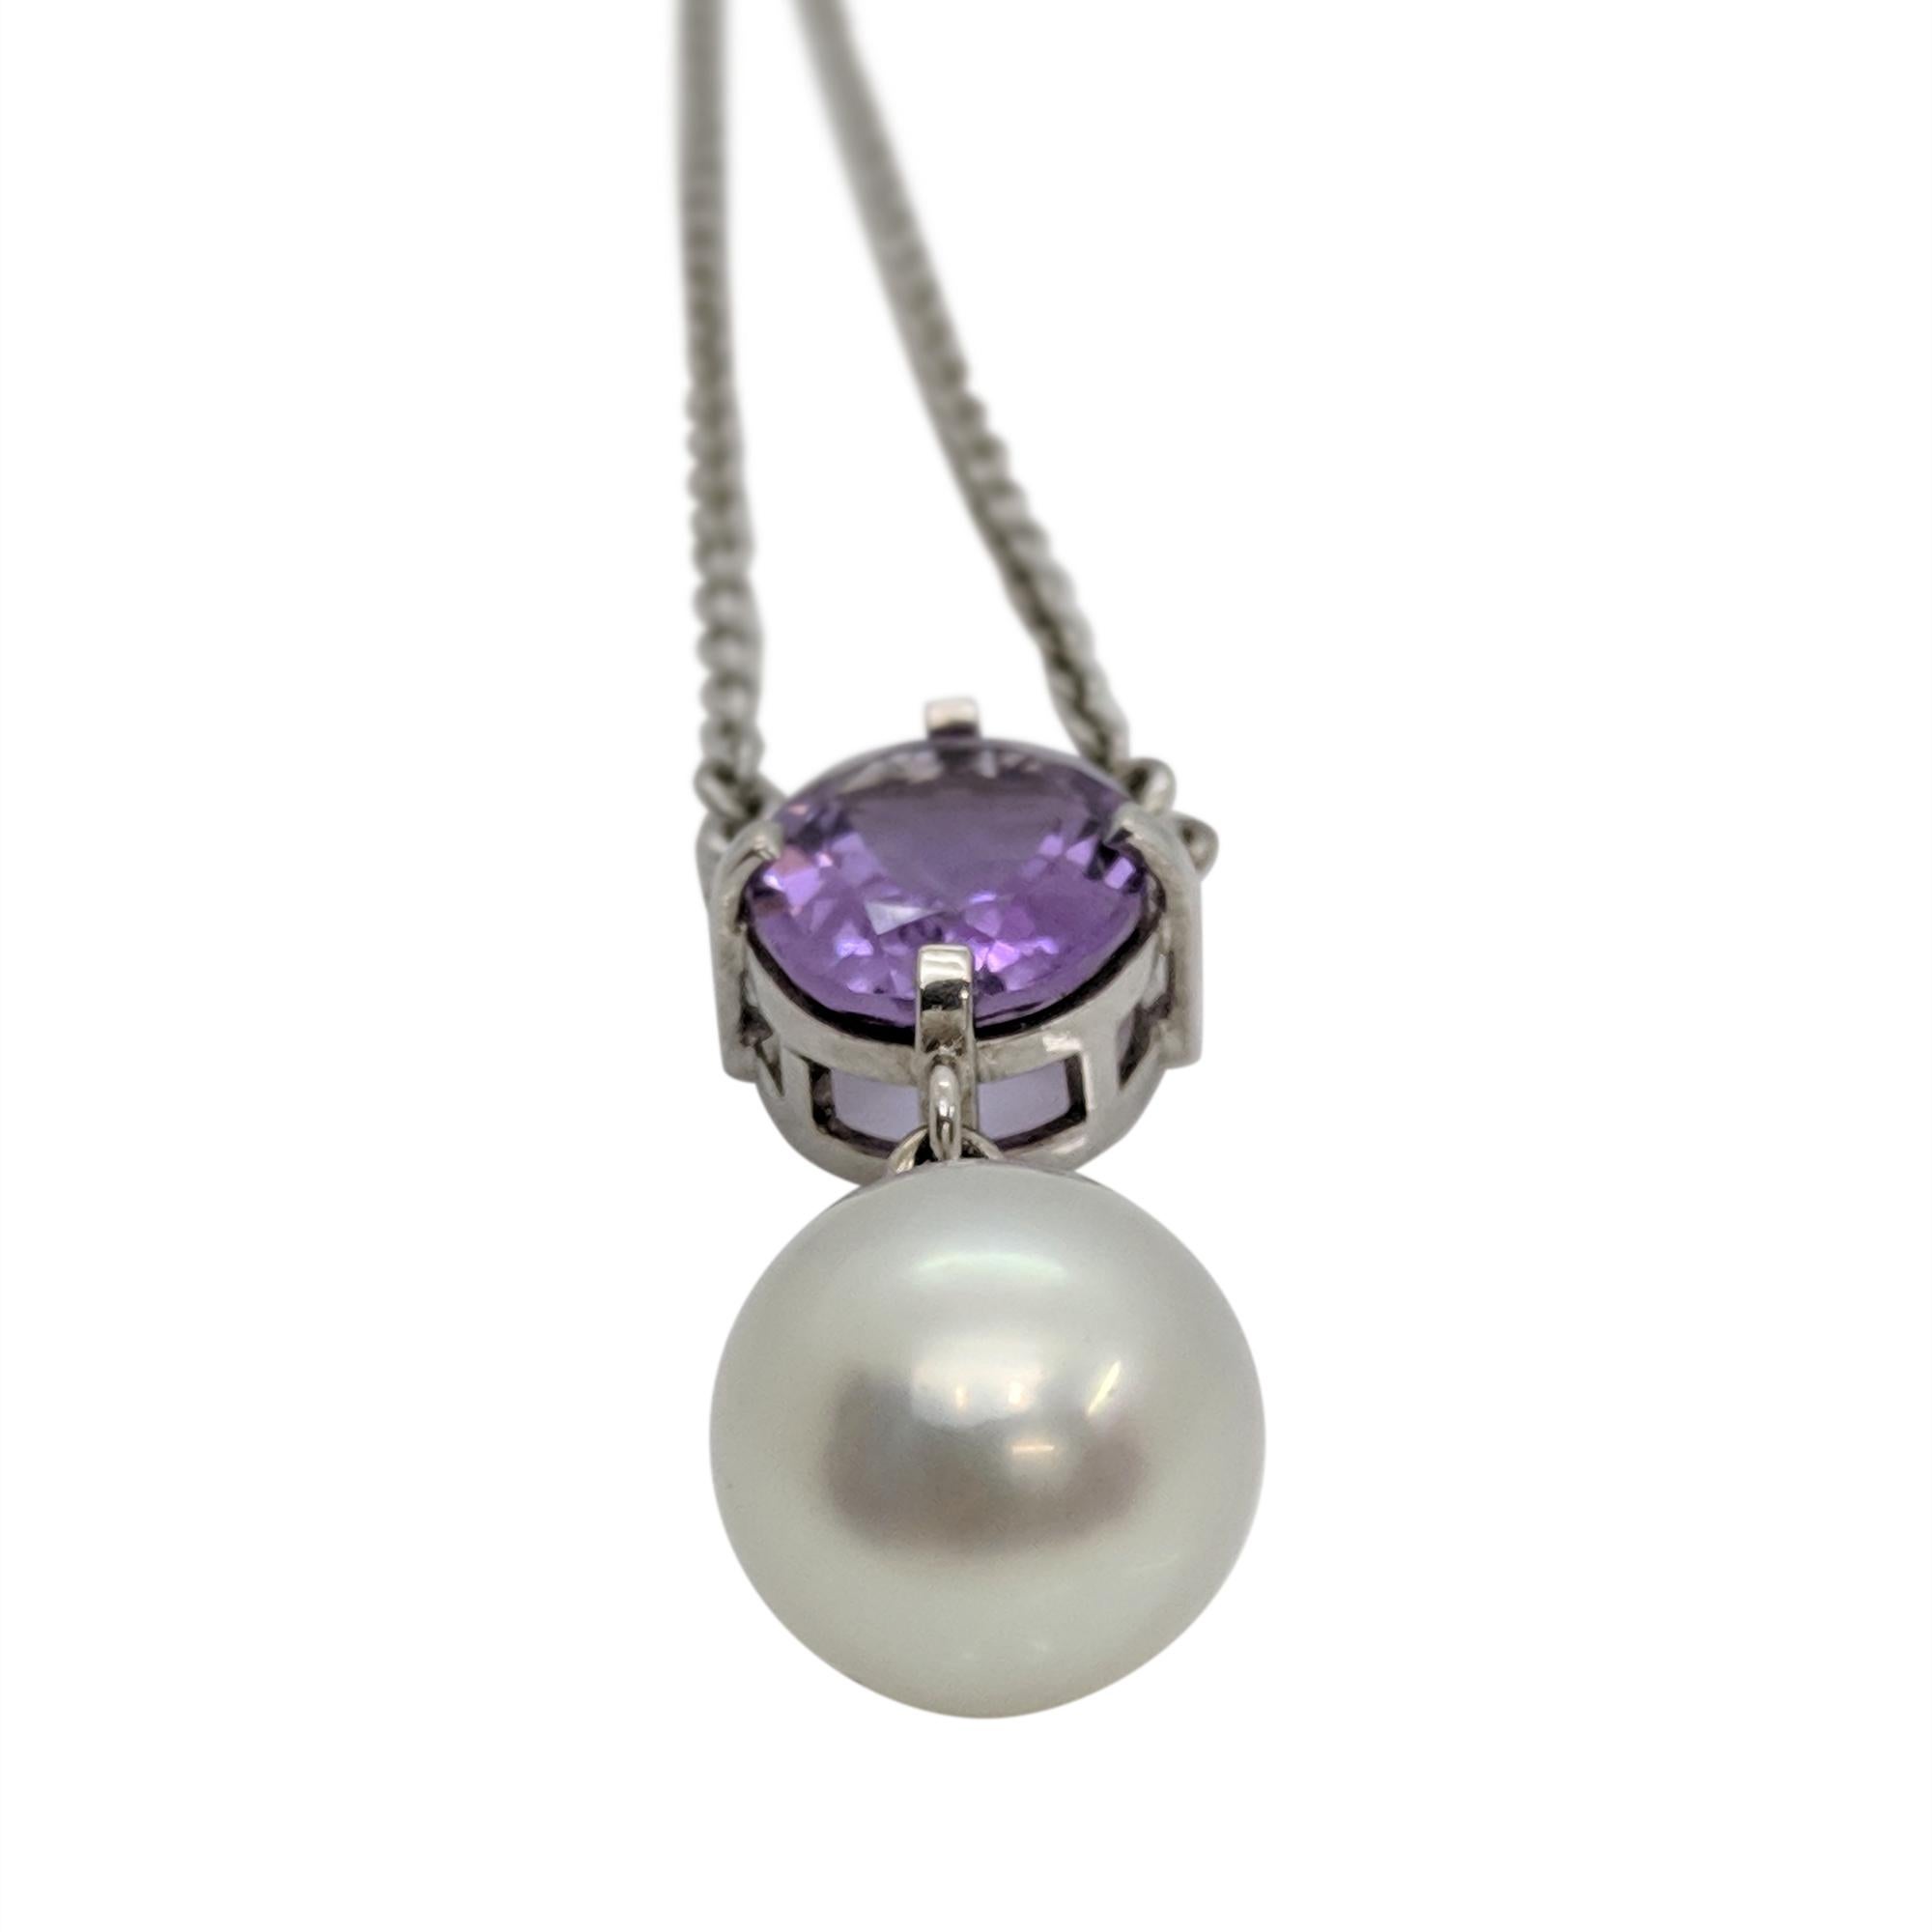 Ametista e Perla

This unique hand-made pendant is set with a stunning oval cut Amethyst  detailed with hanging an articulated 11.72mm oval shaped white South Sea pearl. The pendant  is suspended from an elegant trace chain.

Oval faceted Amethyst: